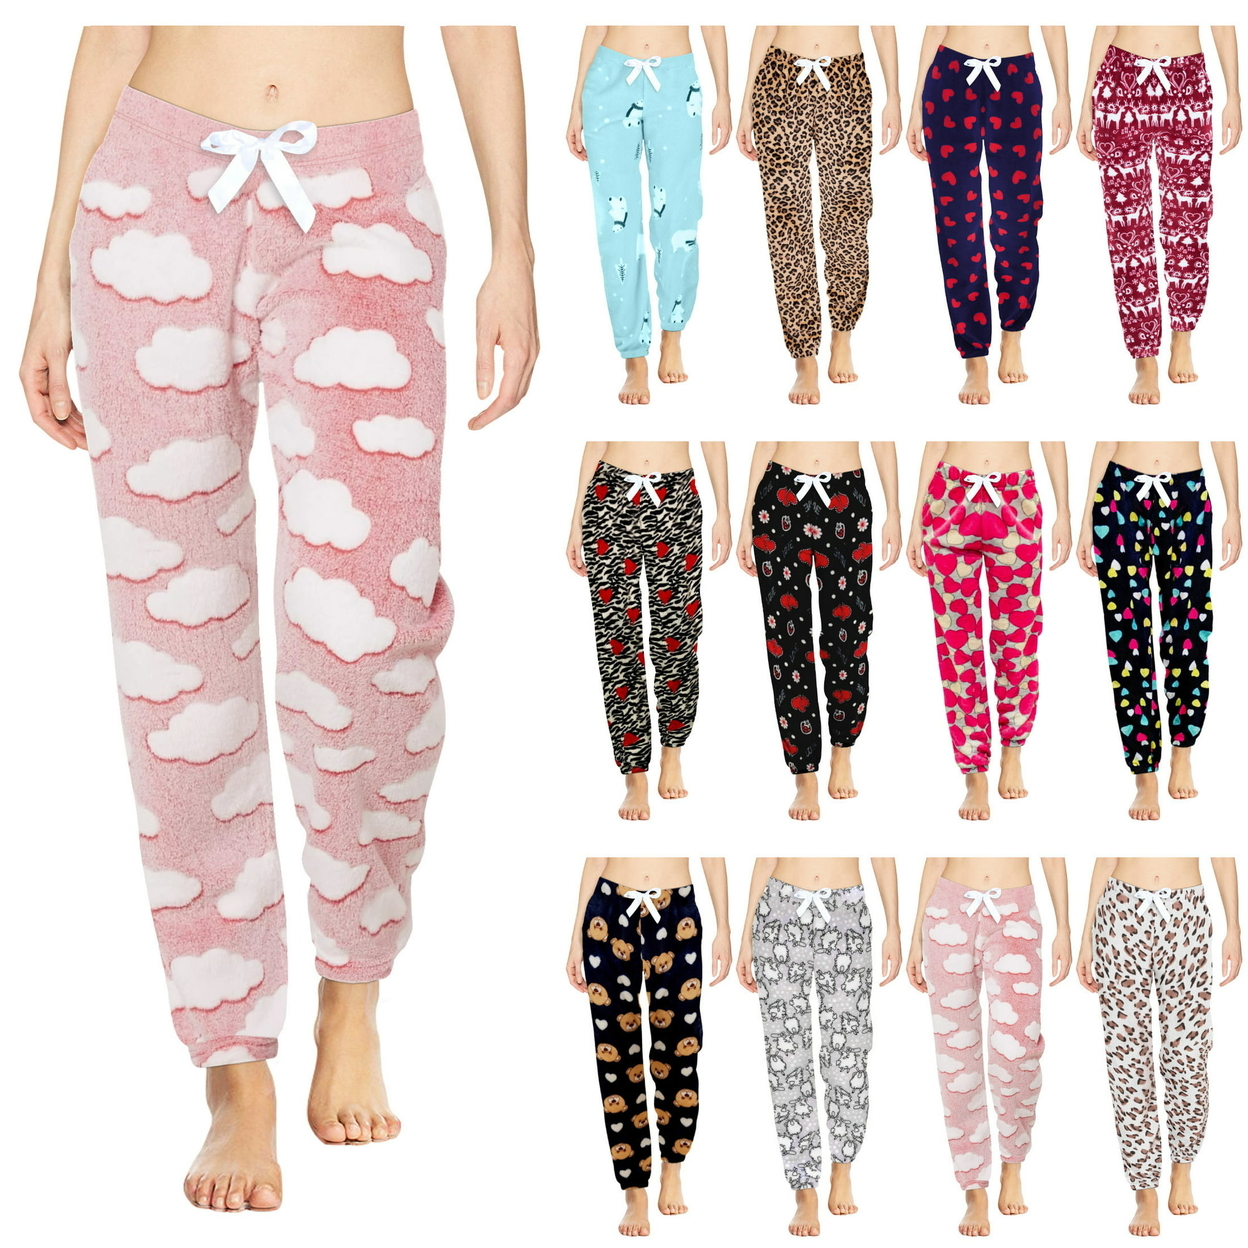 3-Pack: Women's Solid & Printed Ultra-Soft Comfy Stretch Micro-Fleece Pajama Lounge Pants - X-large, Solid